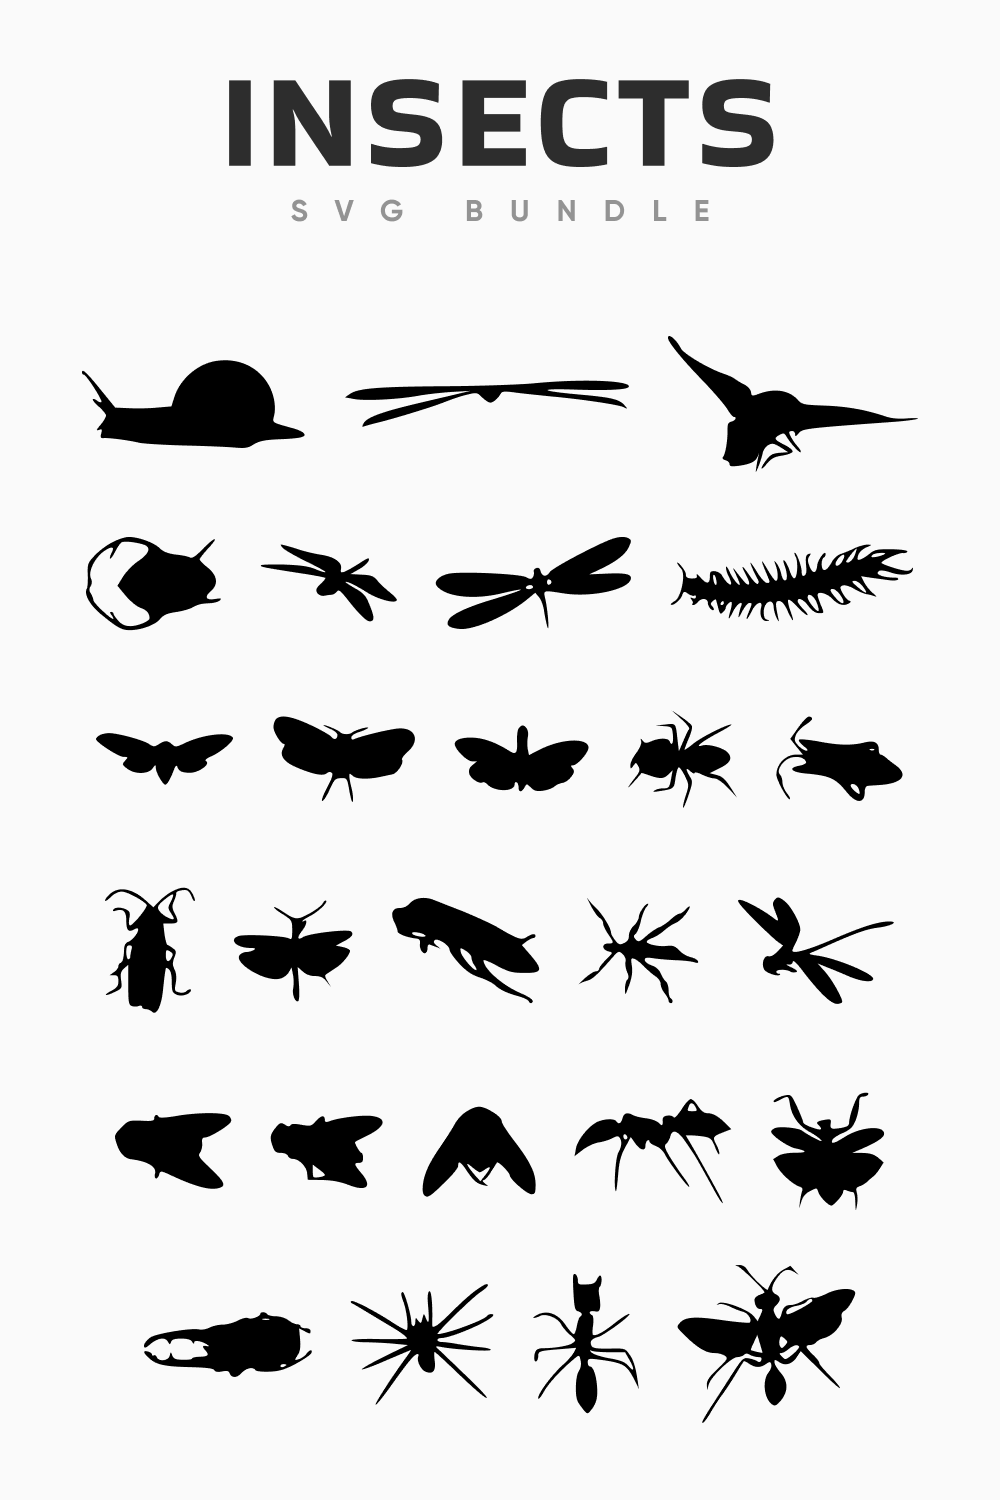 Insects SVG bundle.